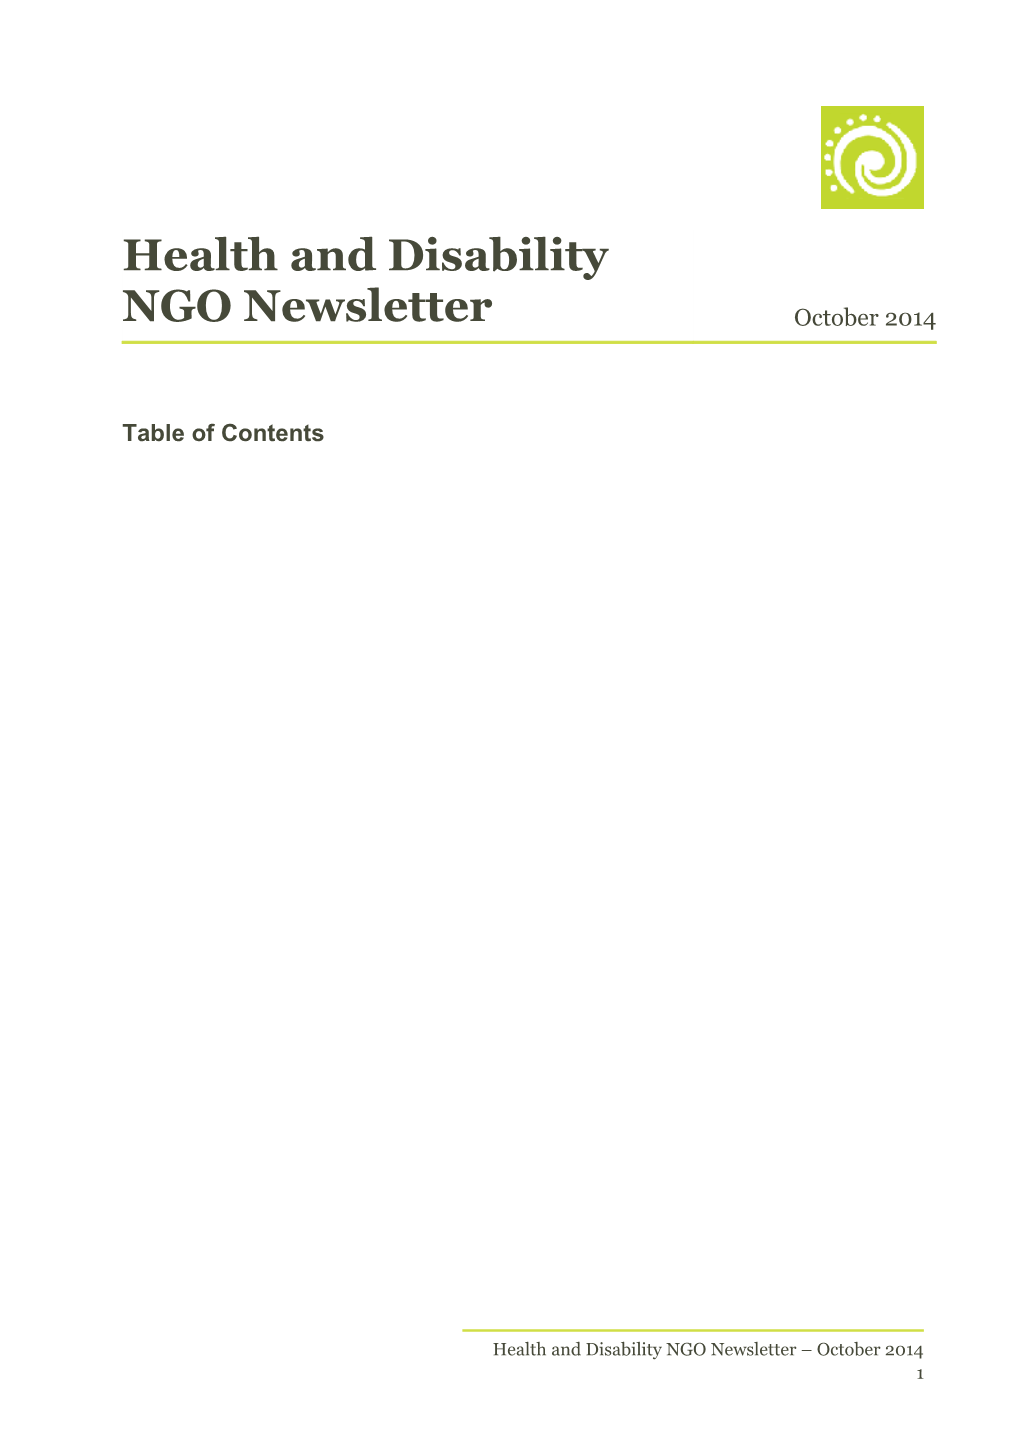 Health and Disability NGO Newsletter - October 2014